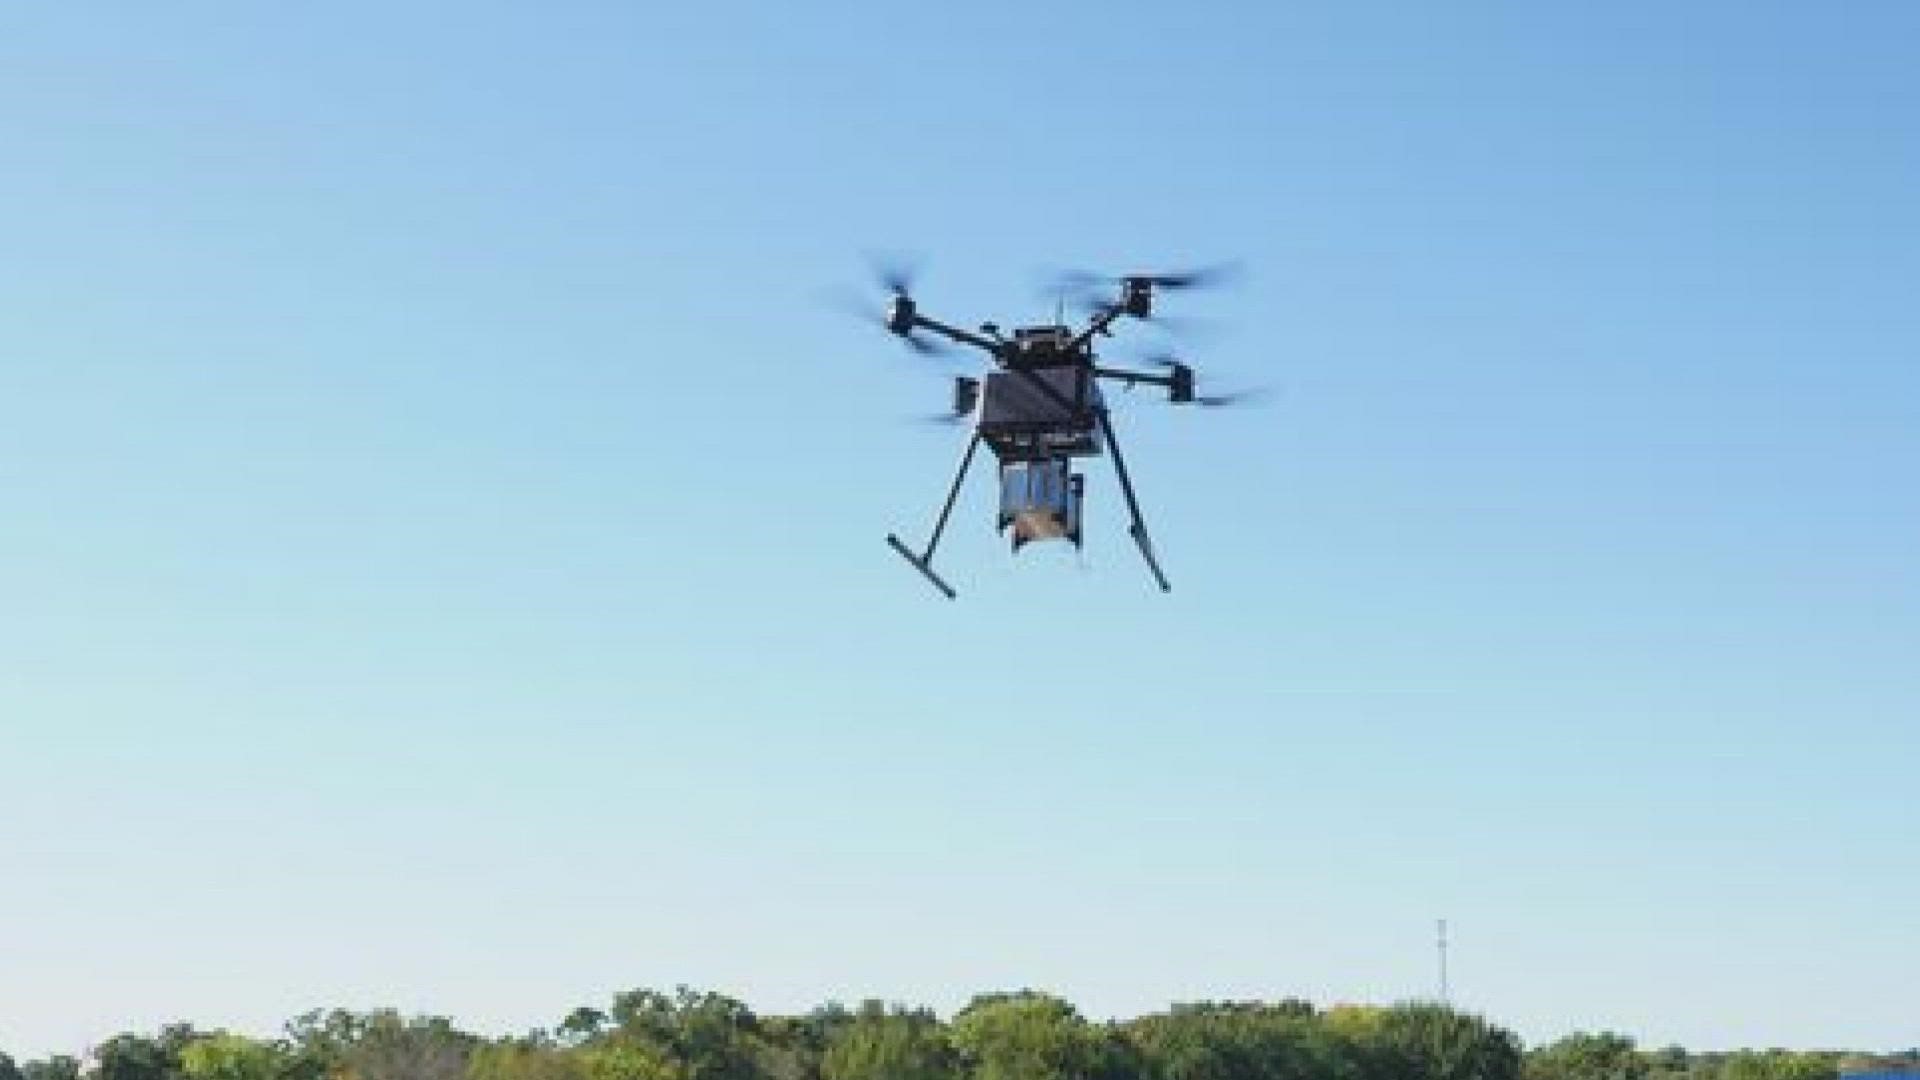 The proposed drone airport would be located near the Walmart Neighborhood Market at Parkwood Square off Custer Road.